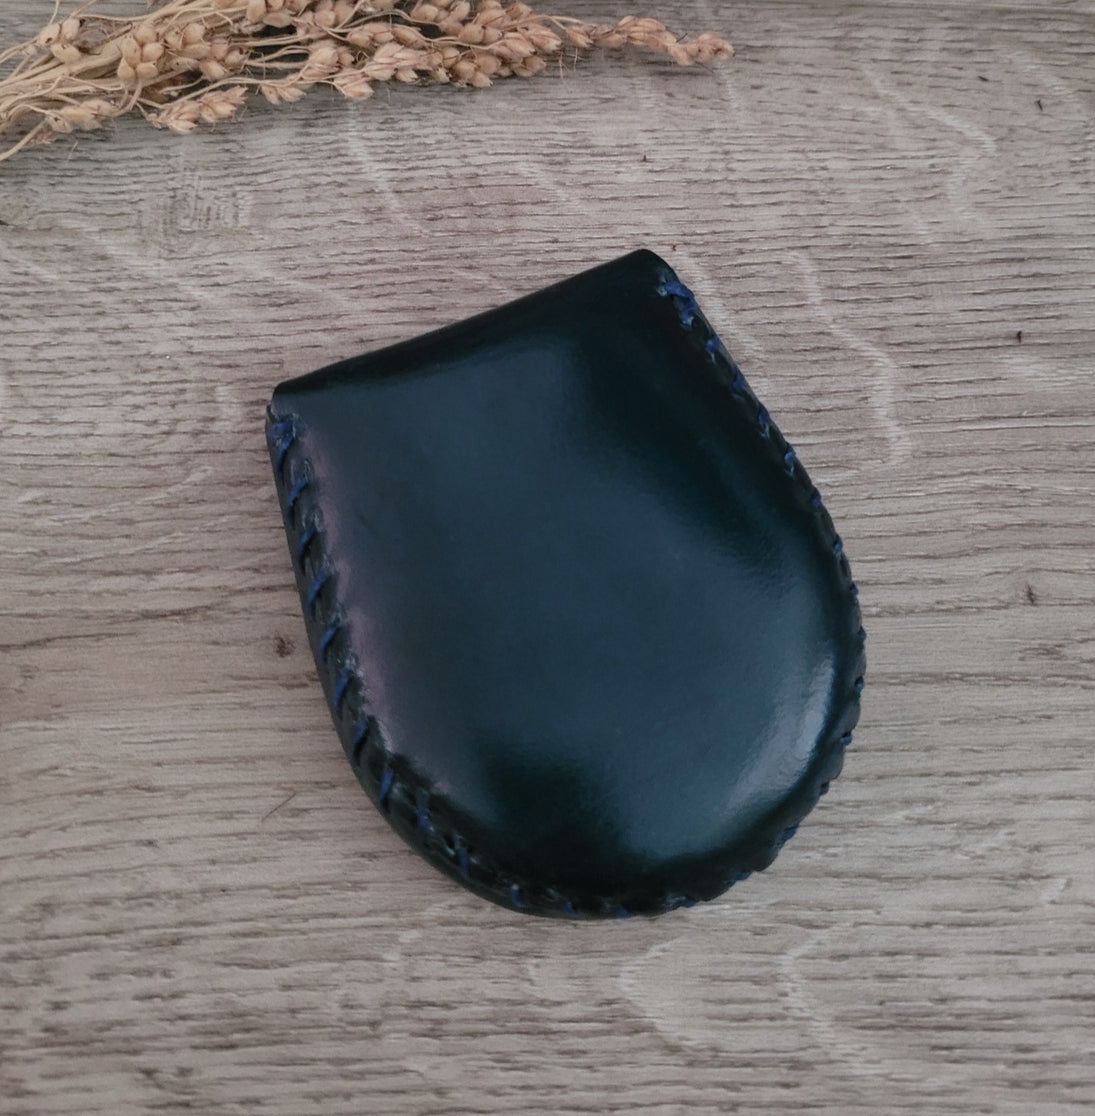 Genuine Leather Coin purse